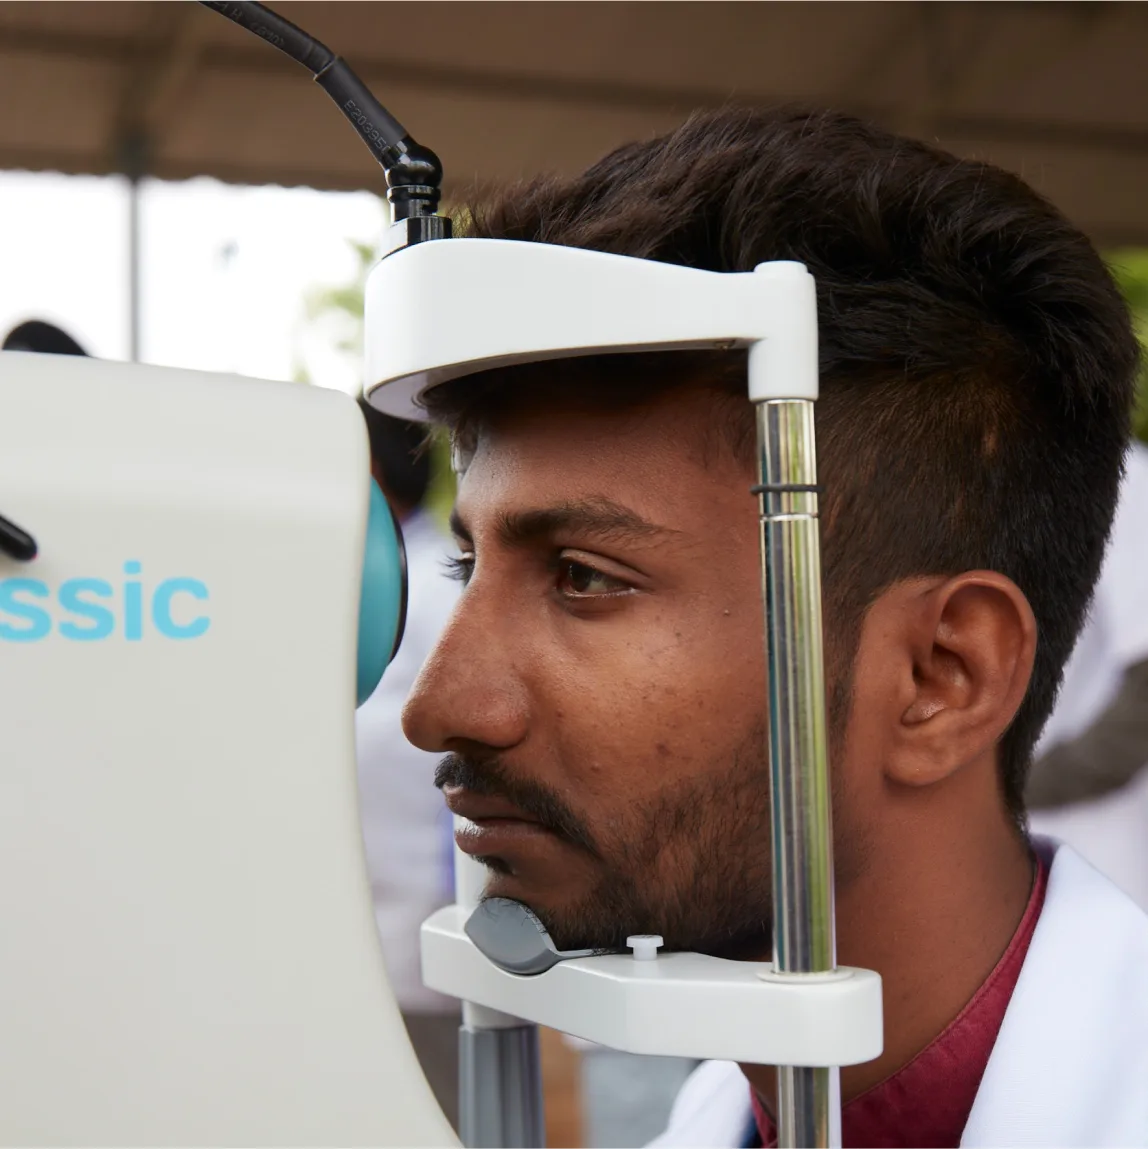 A man is looking at an eye exam machine.